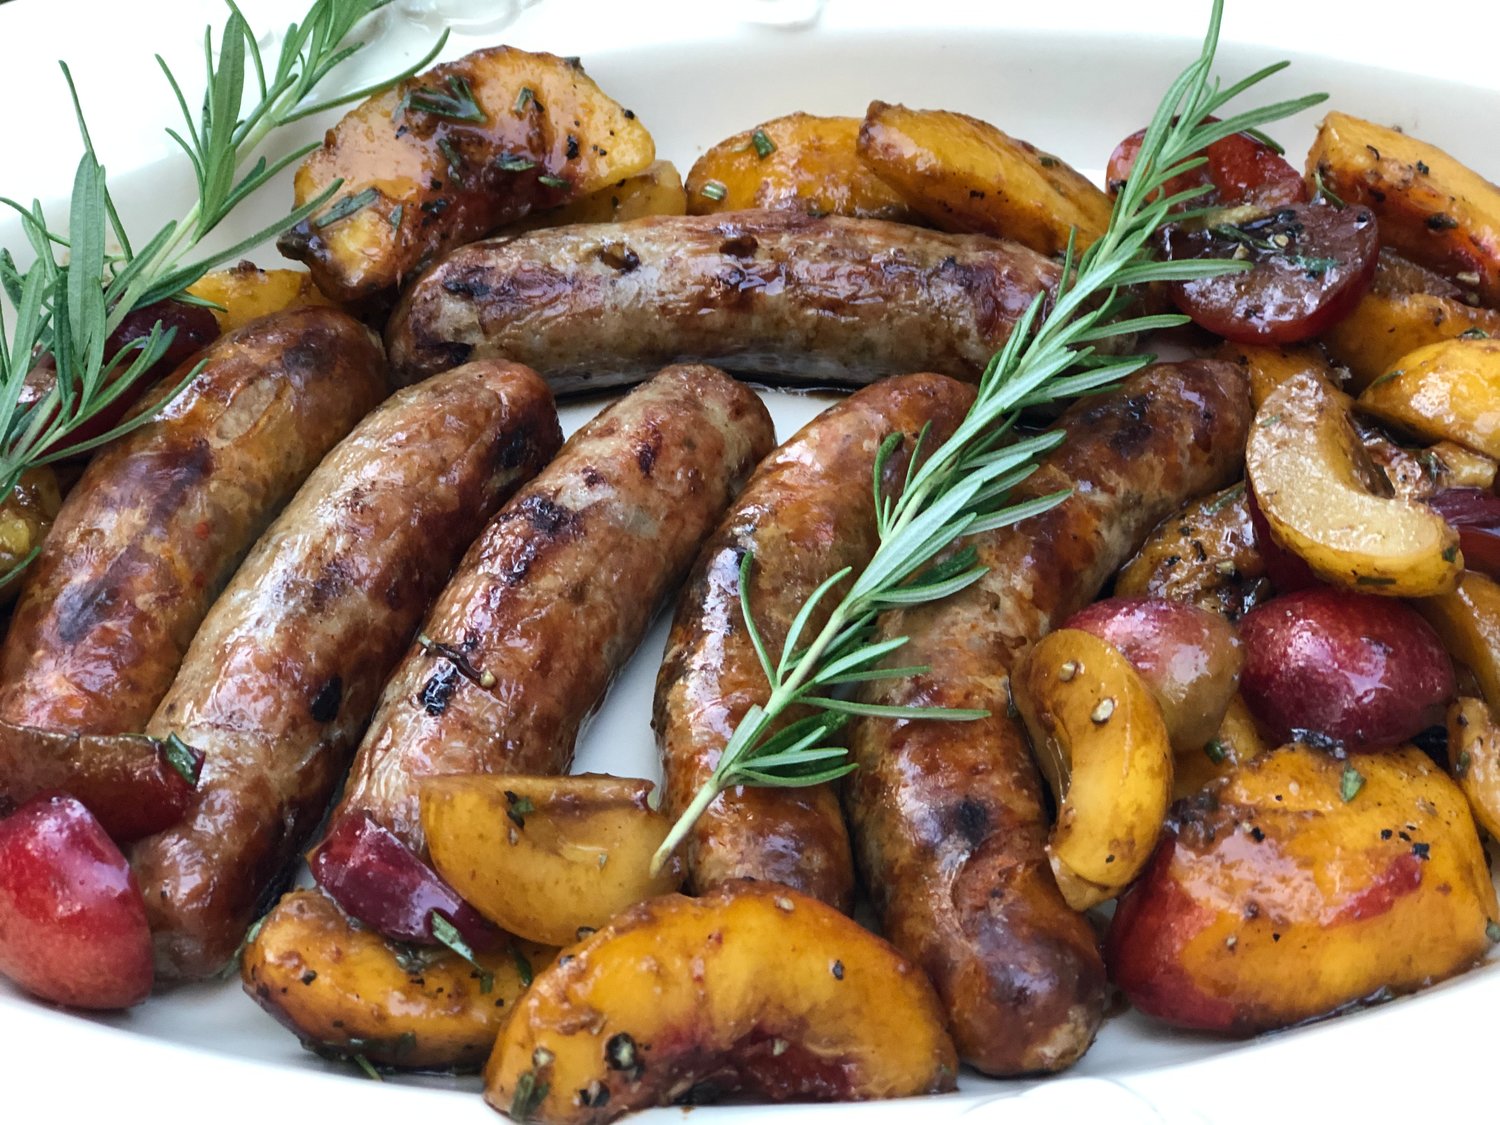 Ron Suhanosky’s Grilled Sausages with Macerated Stone Fruits and Rosemary.